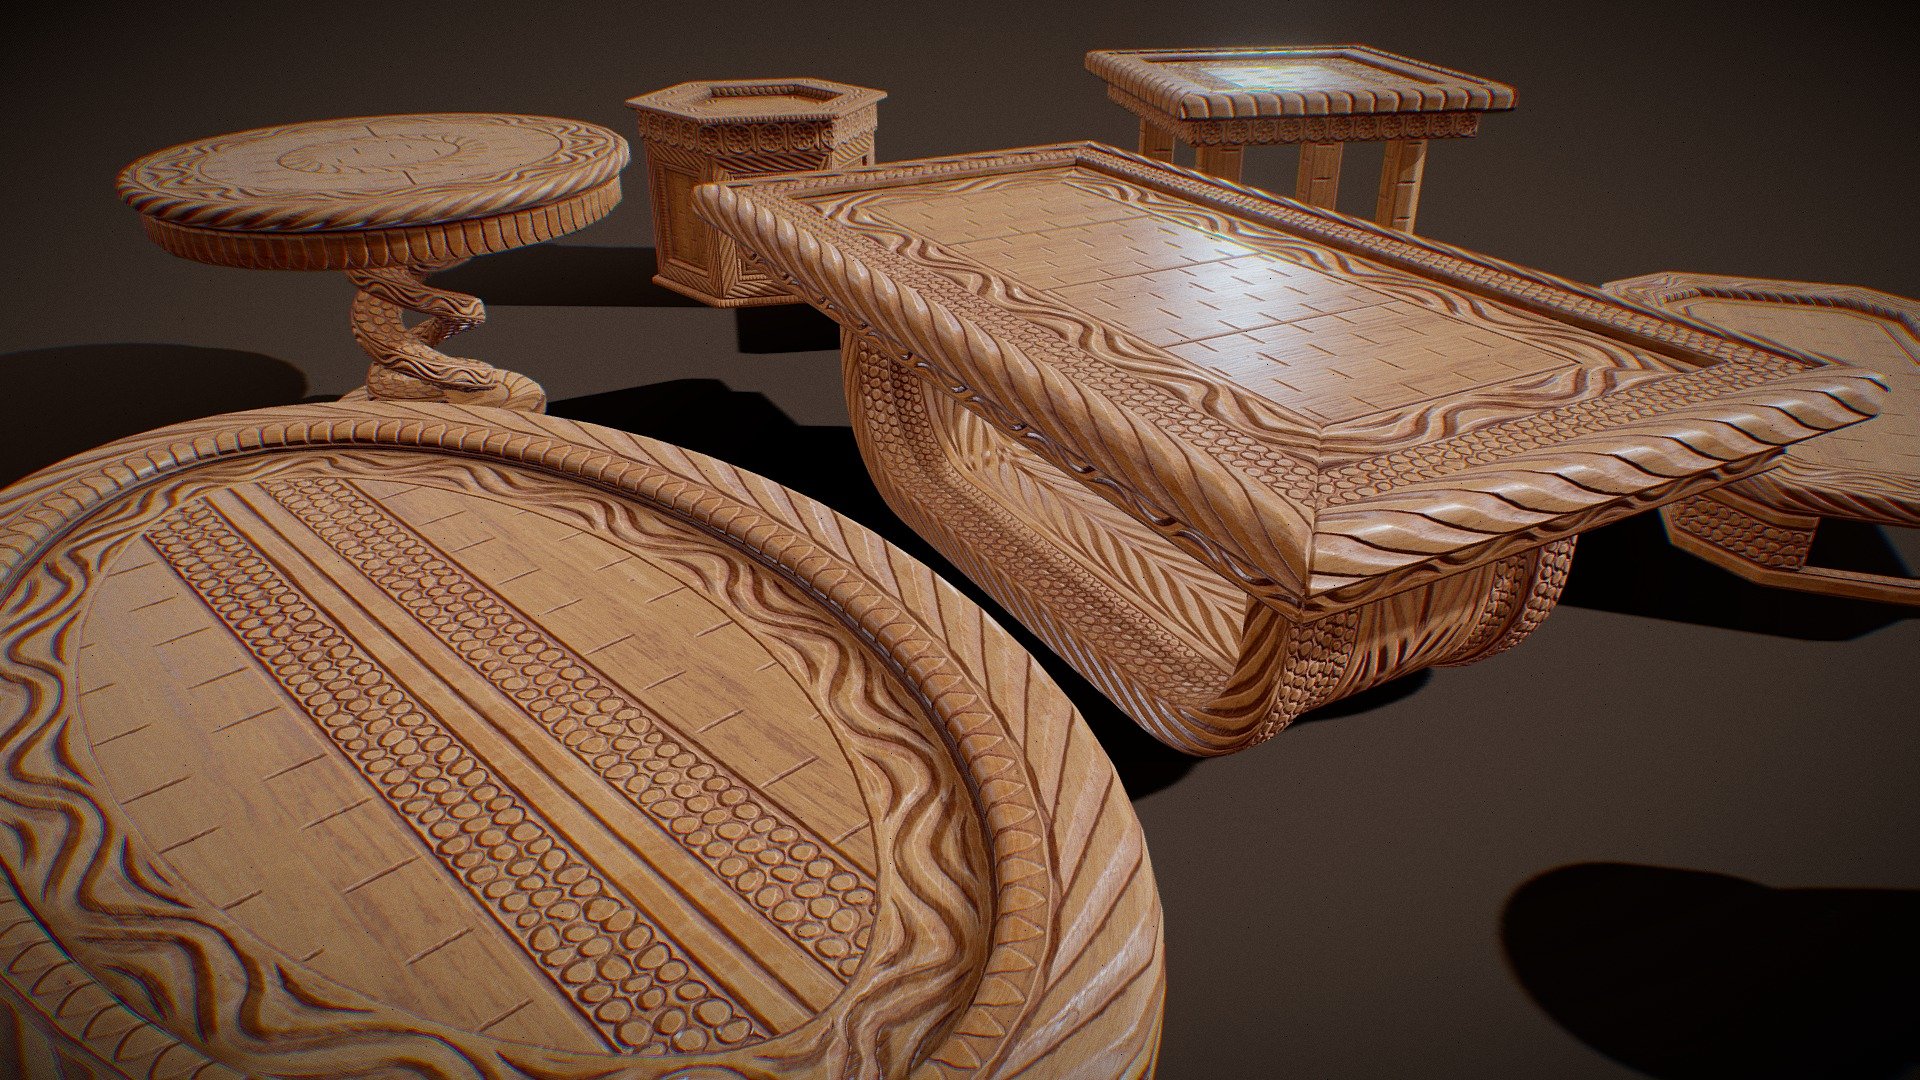 7 Game-Ready Carved Antique Wooden Tables

Mid-Low poly models suitable for Video Games and Arch-Viz.

One trim sheet is used for texturing.

Nothing is baked, so you can edit the UVs in any way you like, or create new models and texture them using this trim sheet.

2048x2048 Textures (AO, Albedo, Roughness, Metalic, Normal, Height)



Seat - 1624 tris

Table01 - 2876 tris

Table02 - 2776 tris

Table03 - 10480 tris

Table04 - 924 tris

Table05 - 860 tris

Table06 - 982 tris
 - Carved Antique Wooden Tables Pack - Furniture - Buy Royalty Free 3D model by Serhii3D 3d model